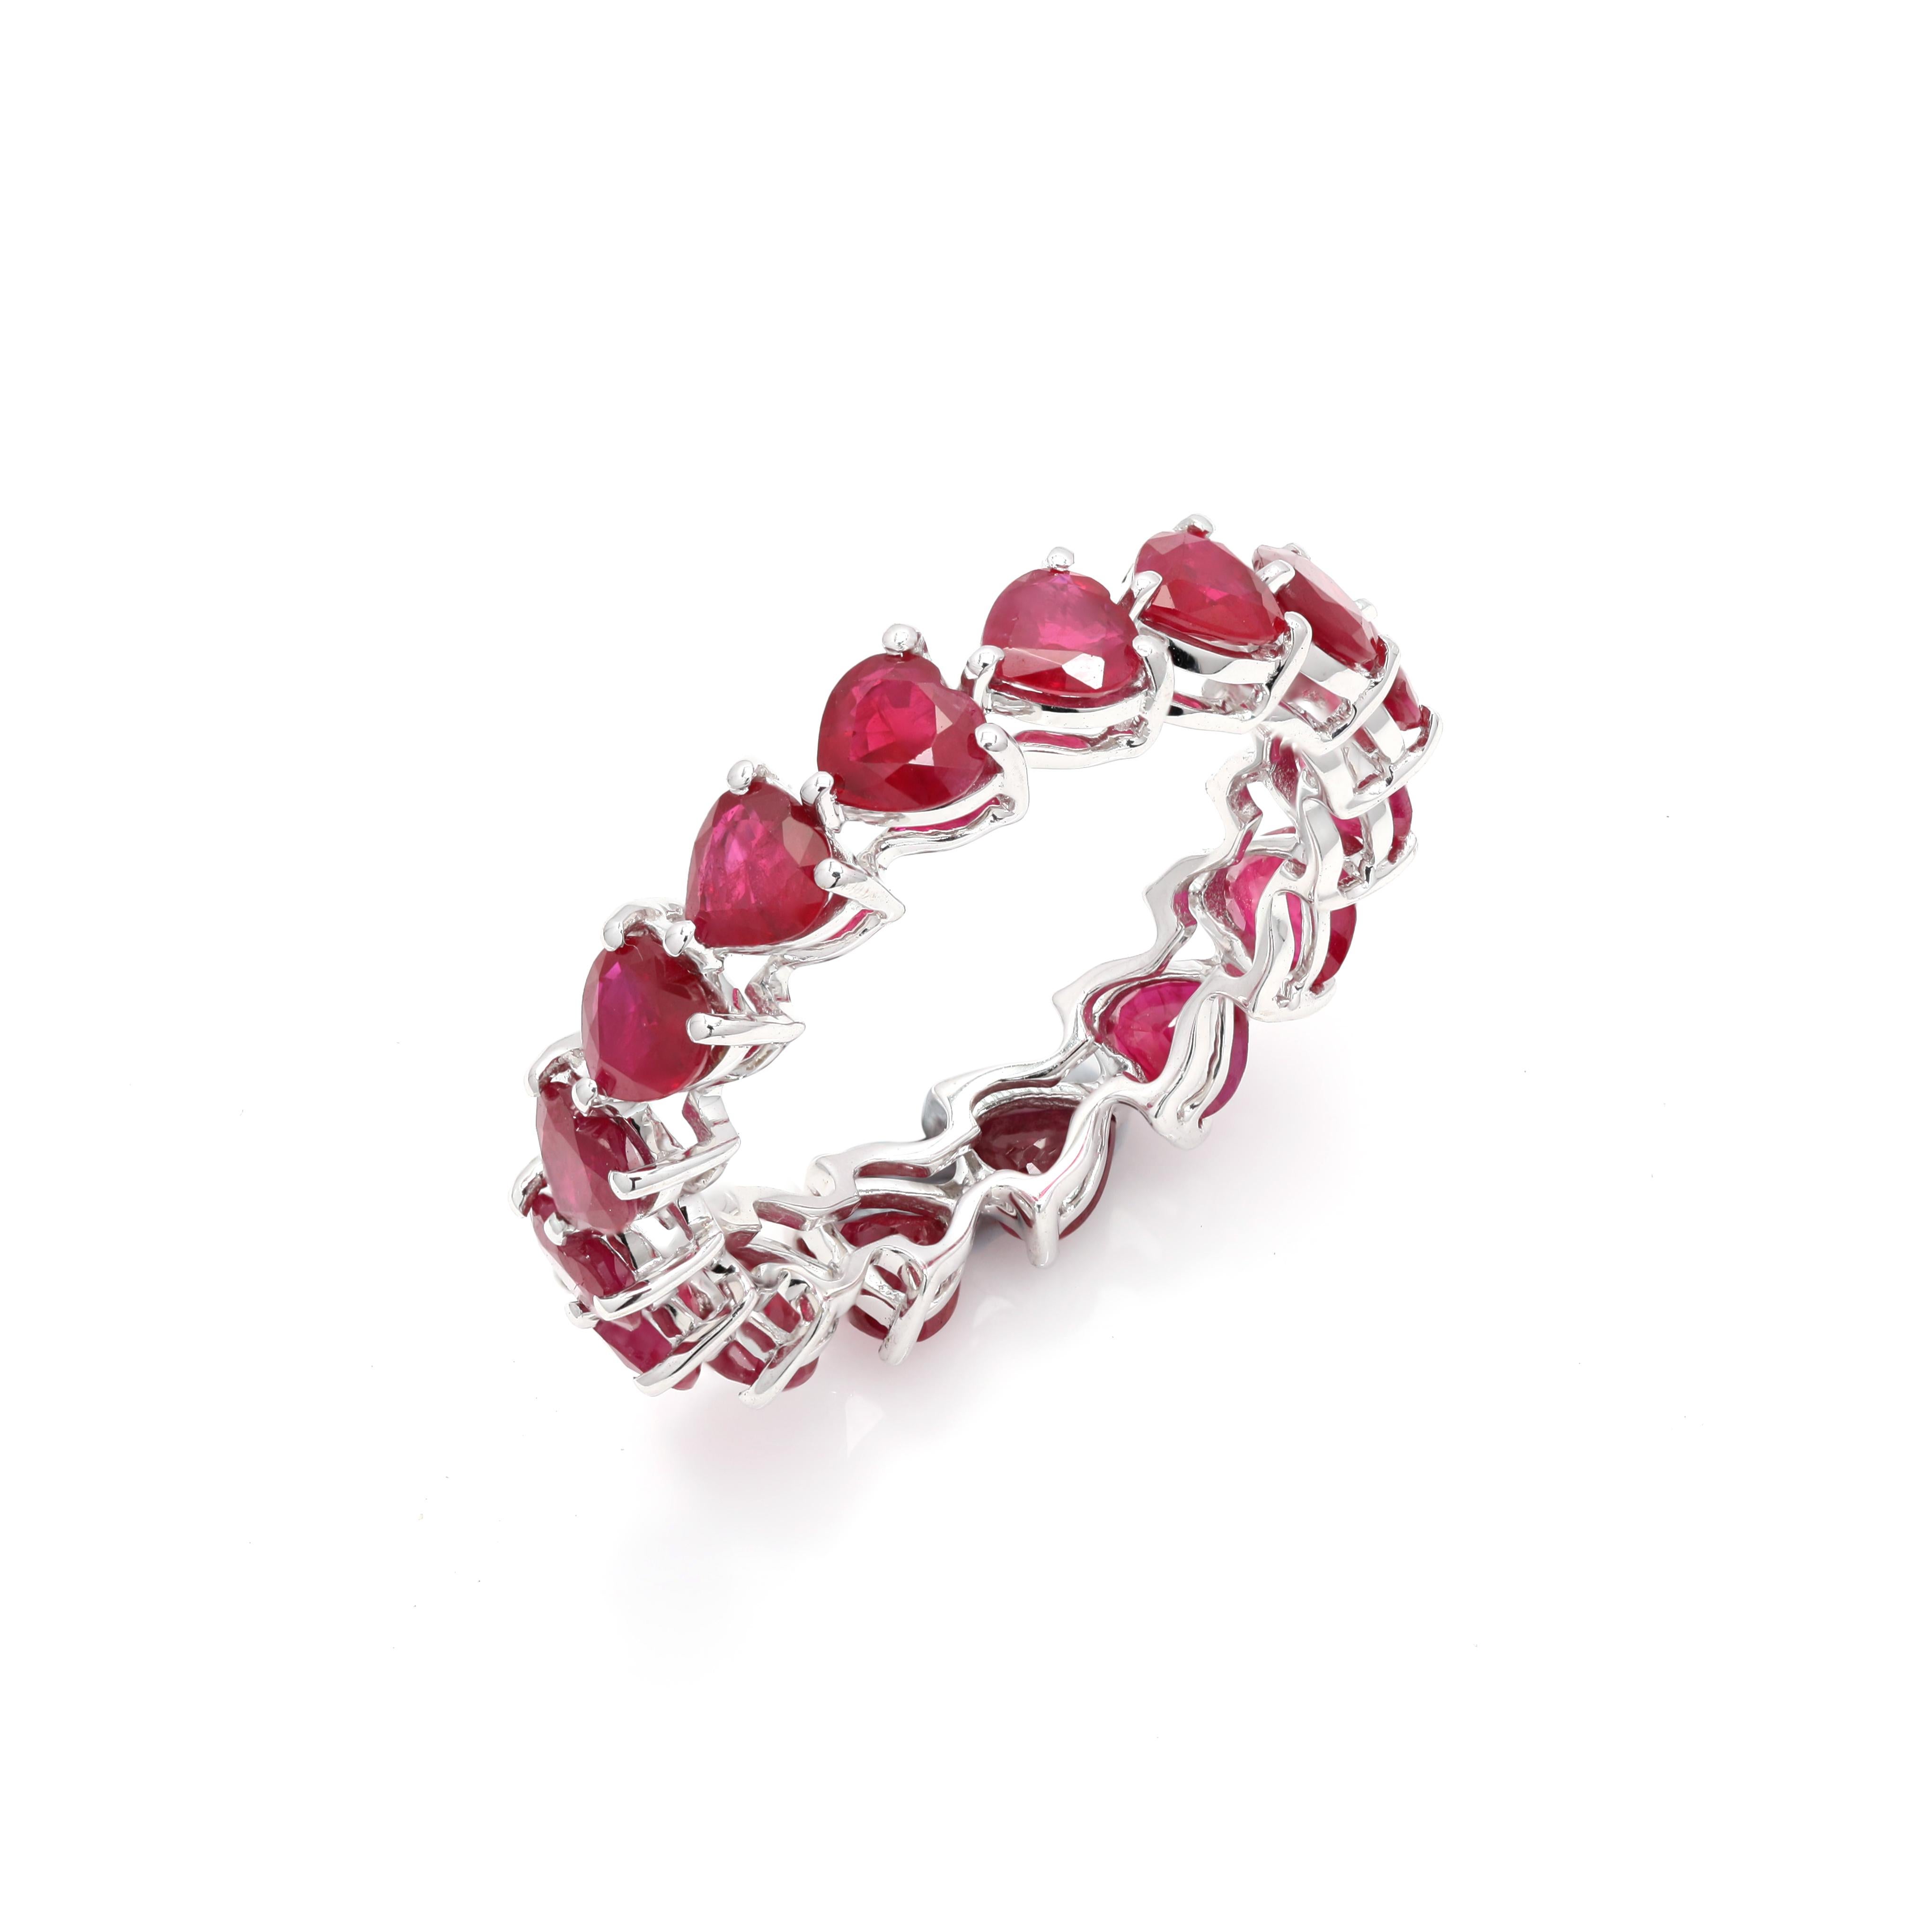 For Sale:  4.41 Carat Ruby Eternity Band, 18K White Gold Ruby Band Ring 7